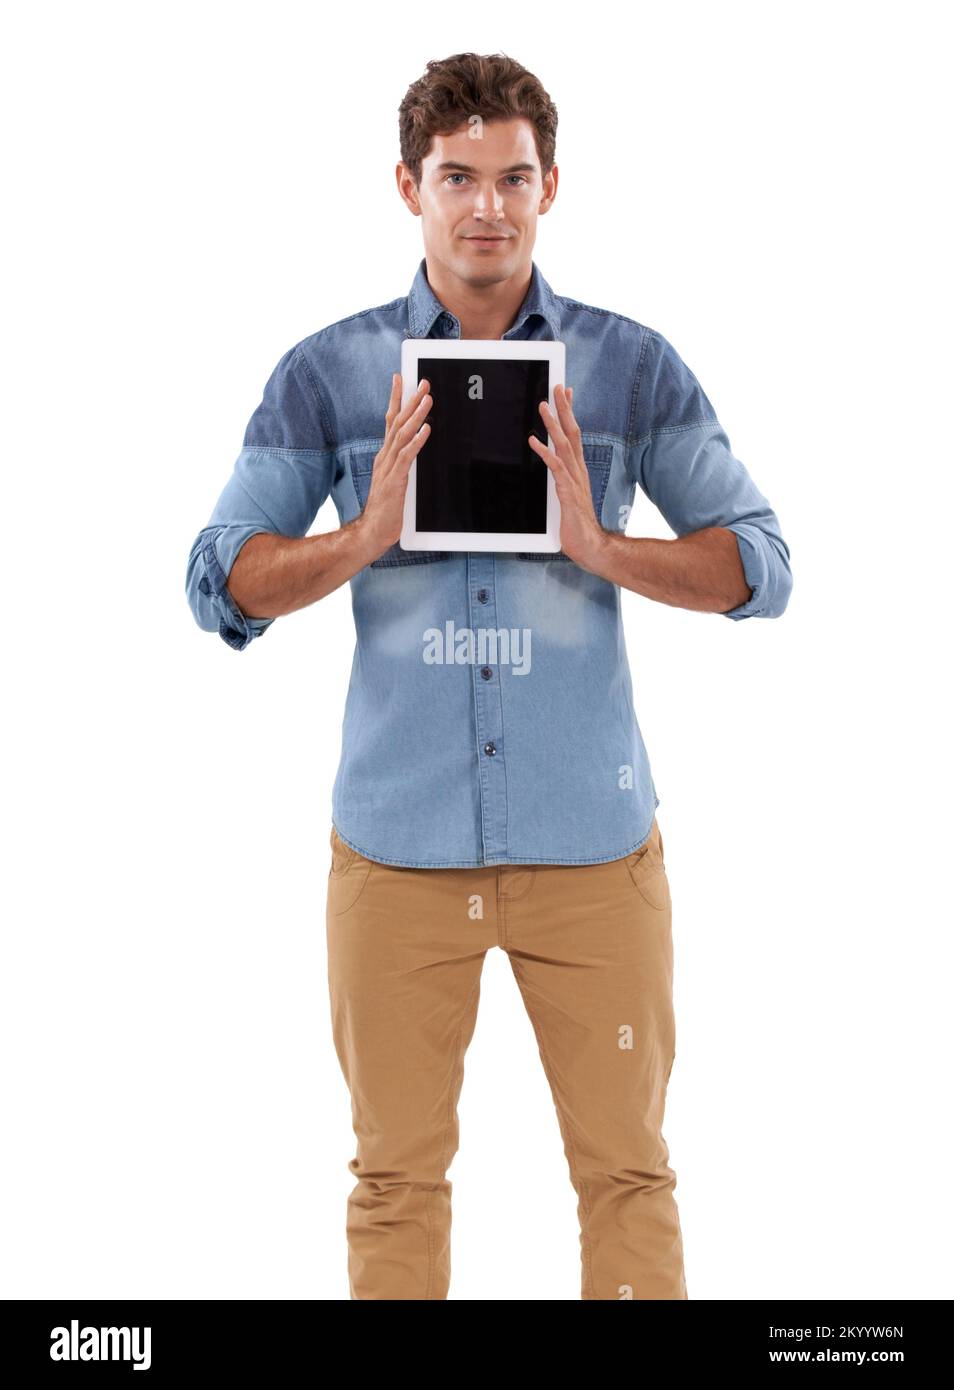 You could be on this screen. A casual young man holding up his digital tablet. Stock Photo